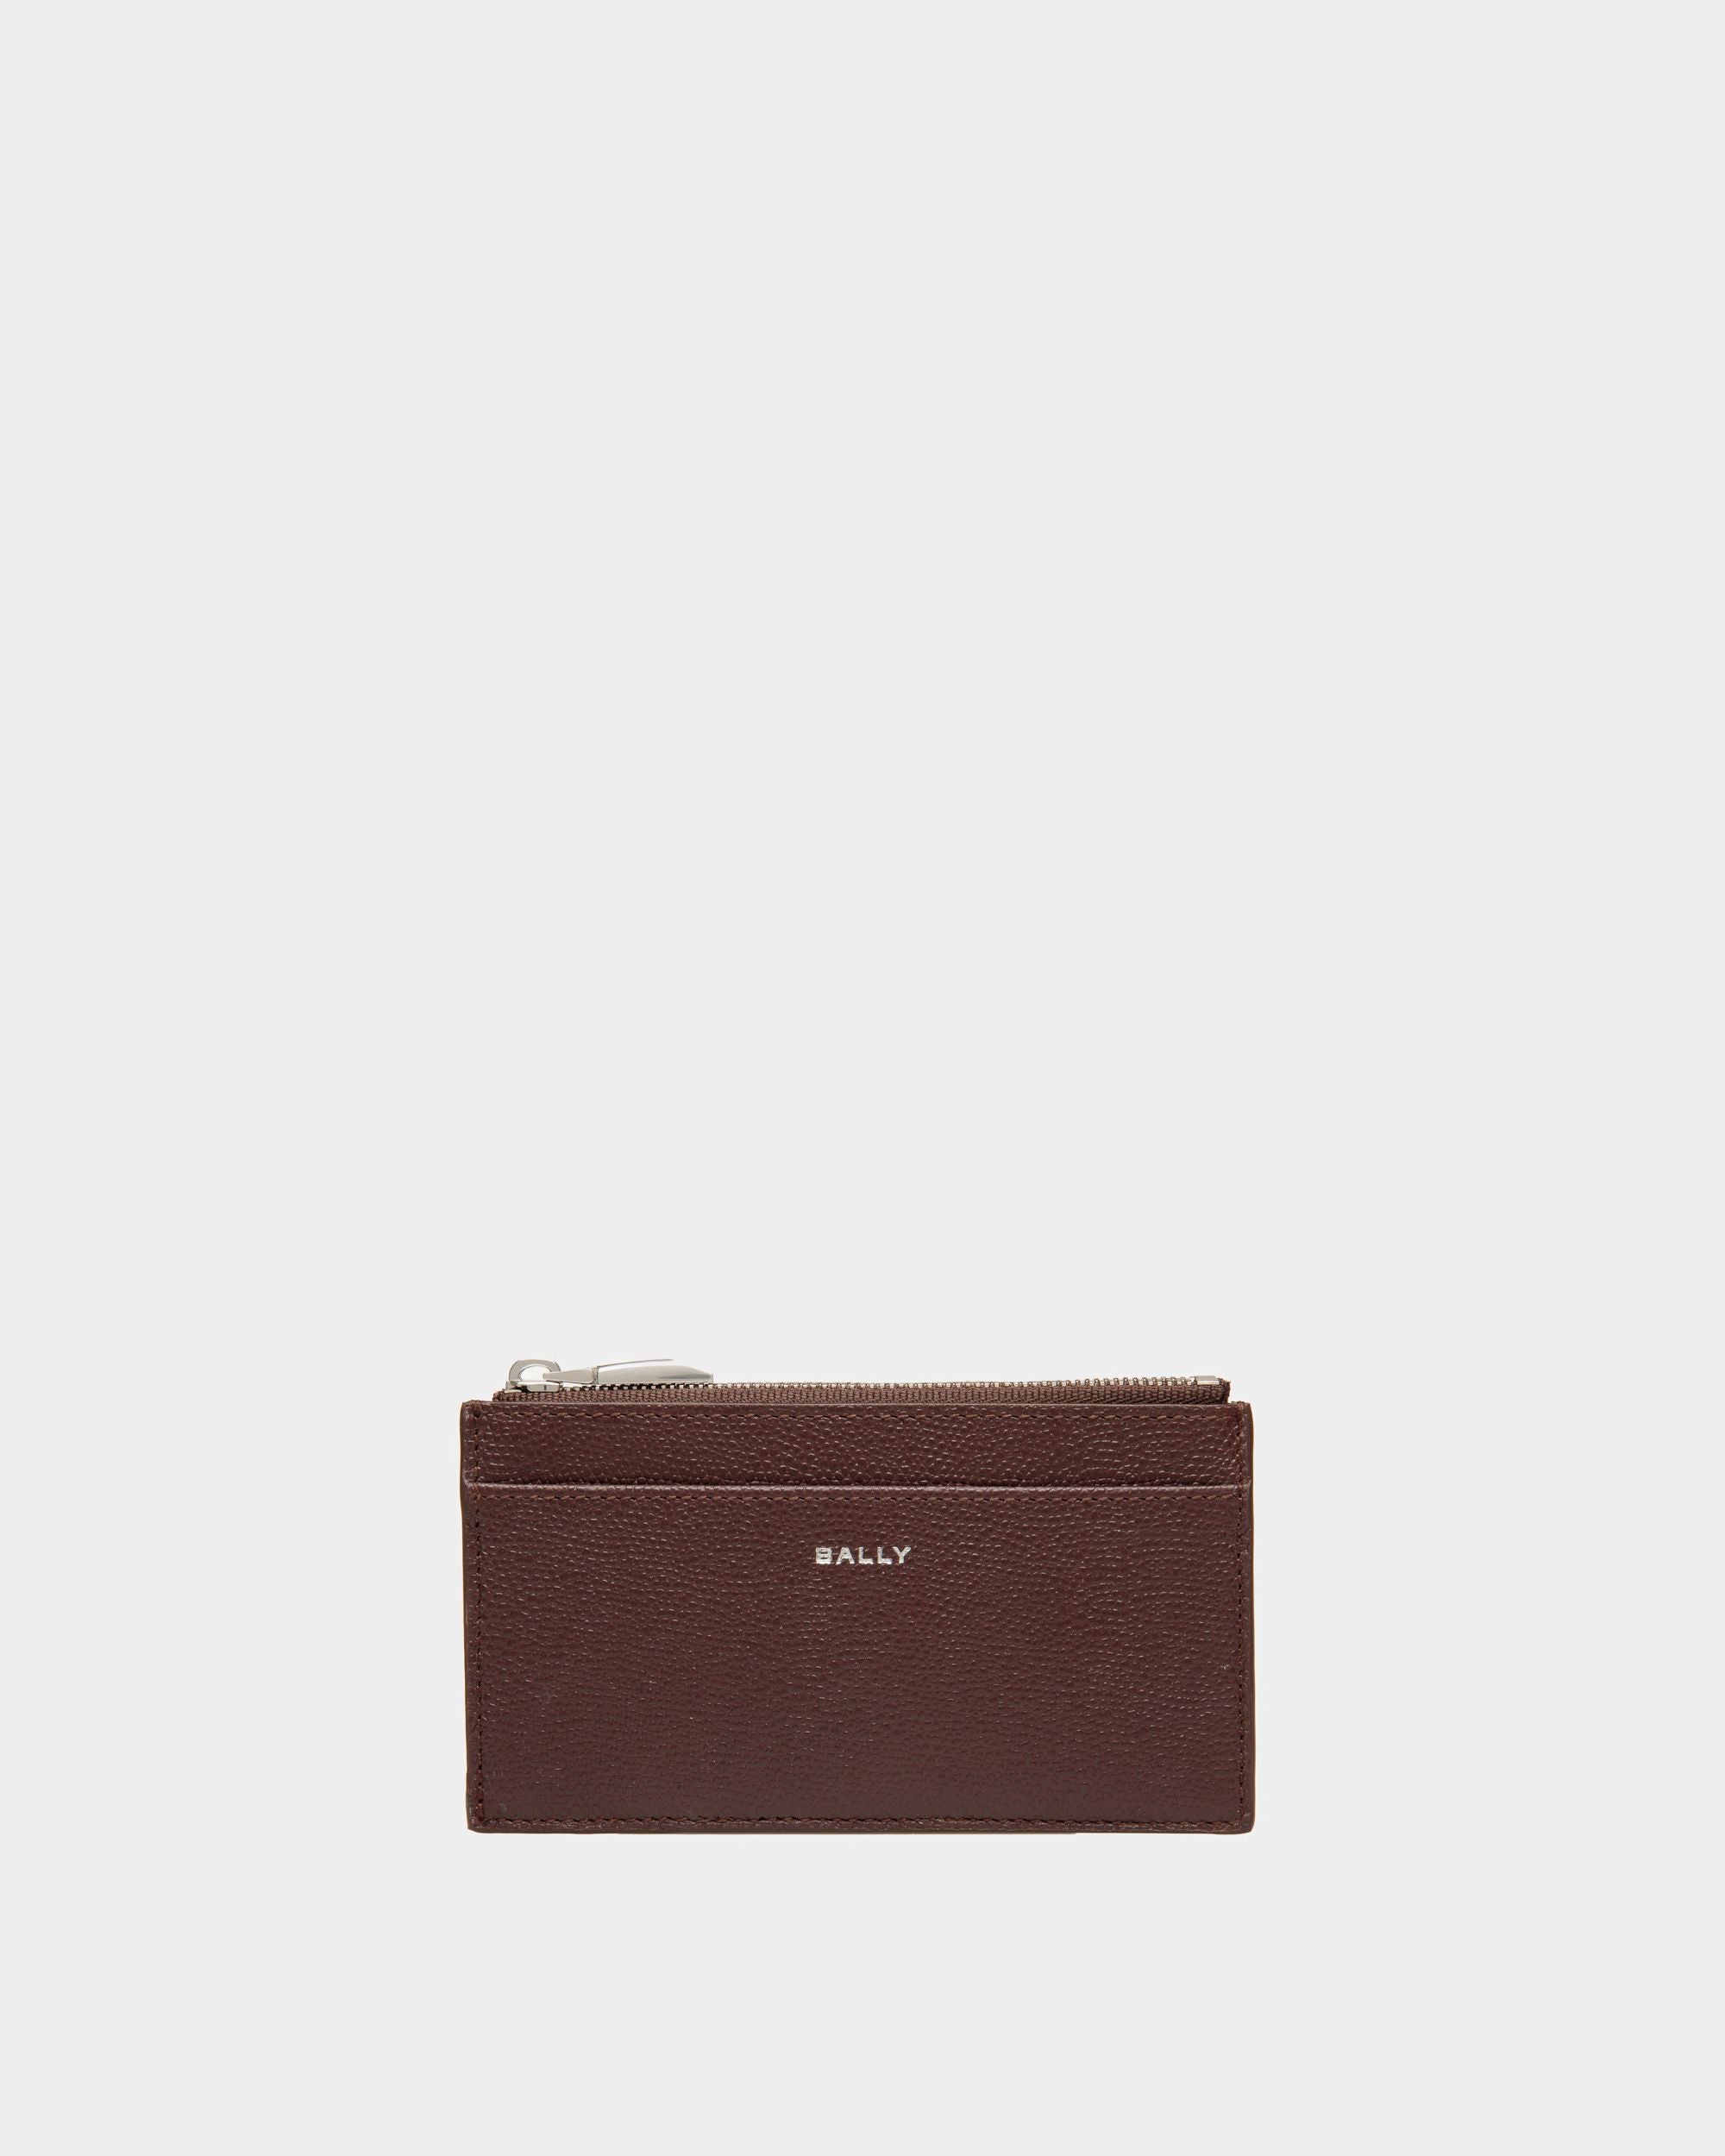 Flag | Men's Coin and Card Holder in Chestnut Brown and Red Embossed Leather | Bally | Still Life Front